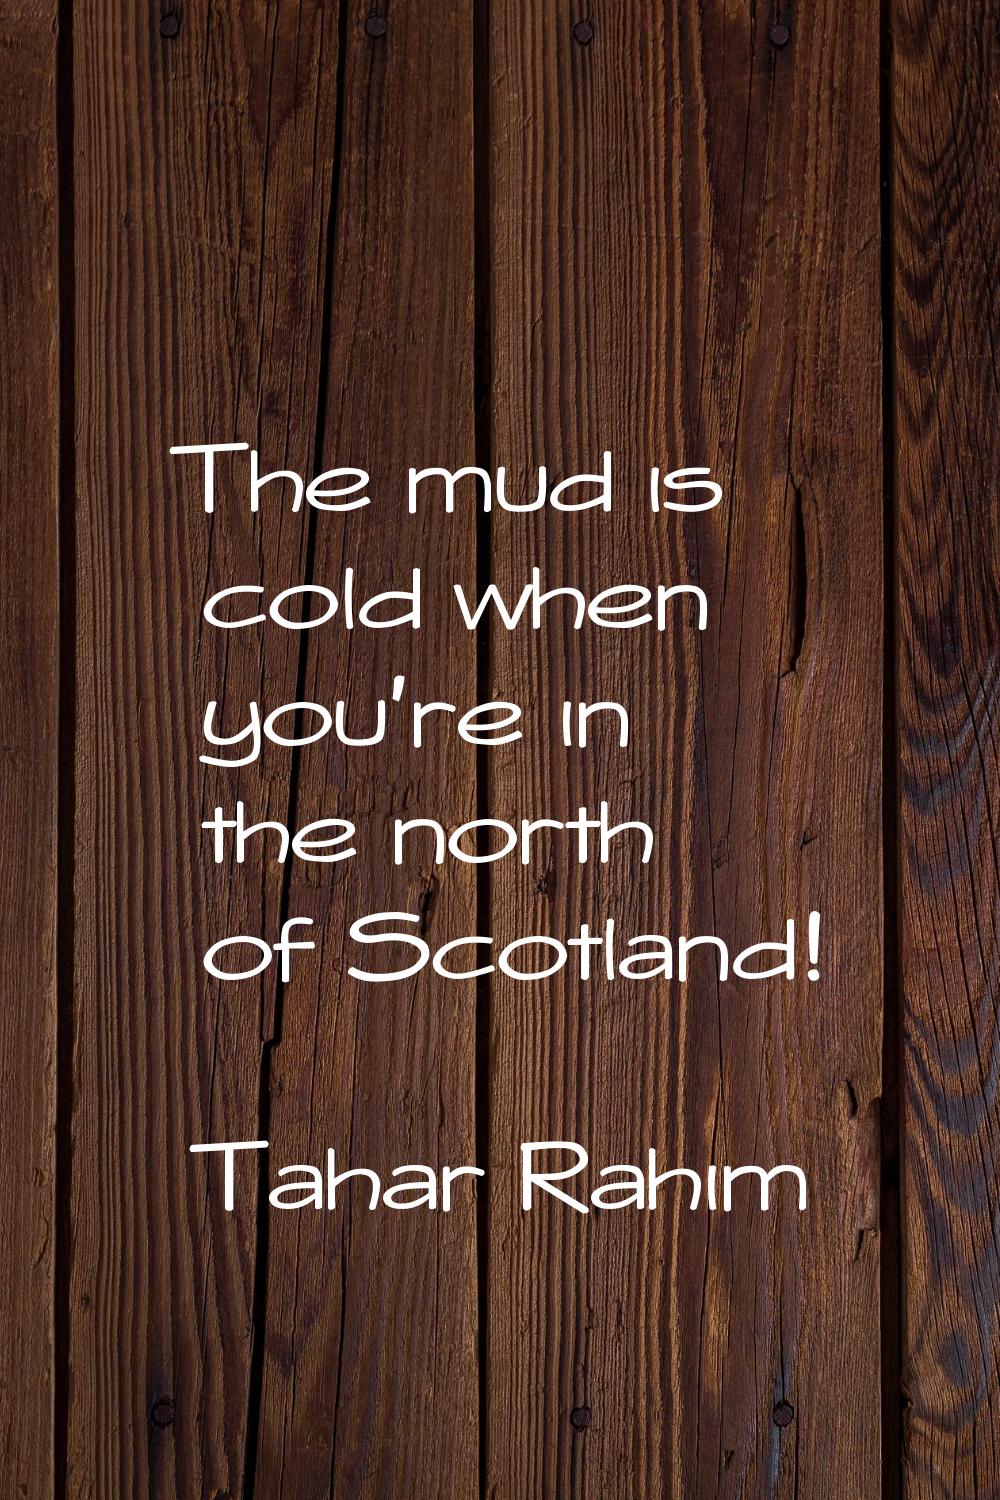 The mud is cold when you're in the north of Scotland!